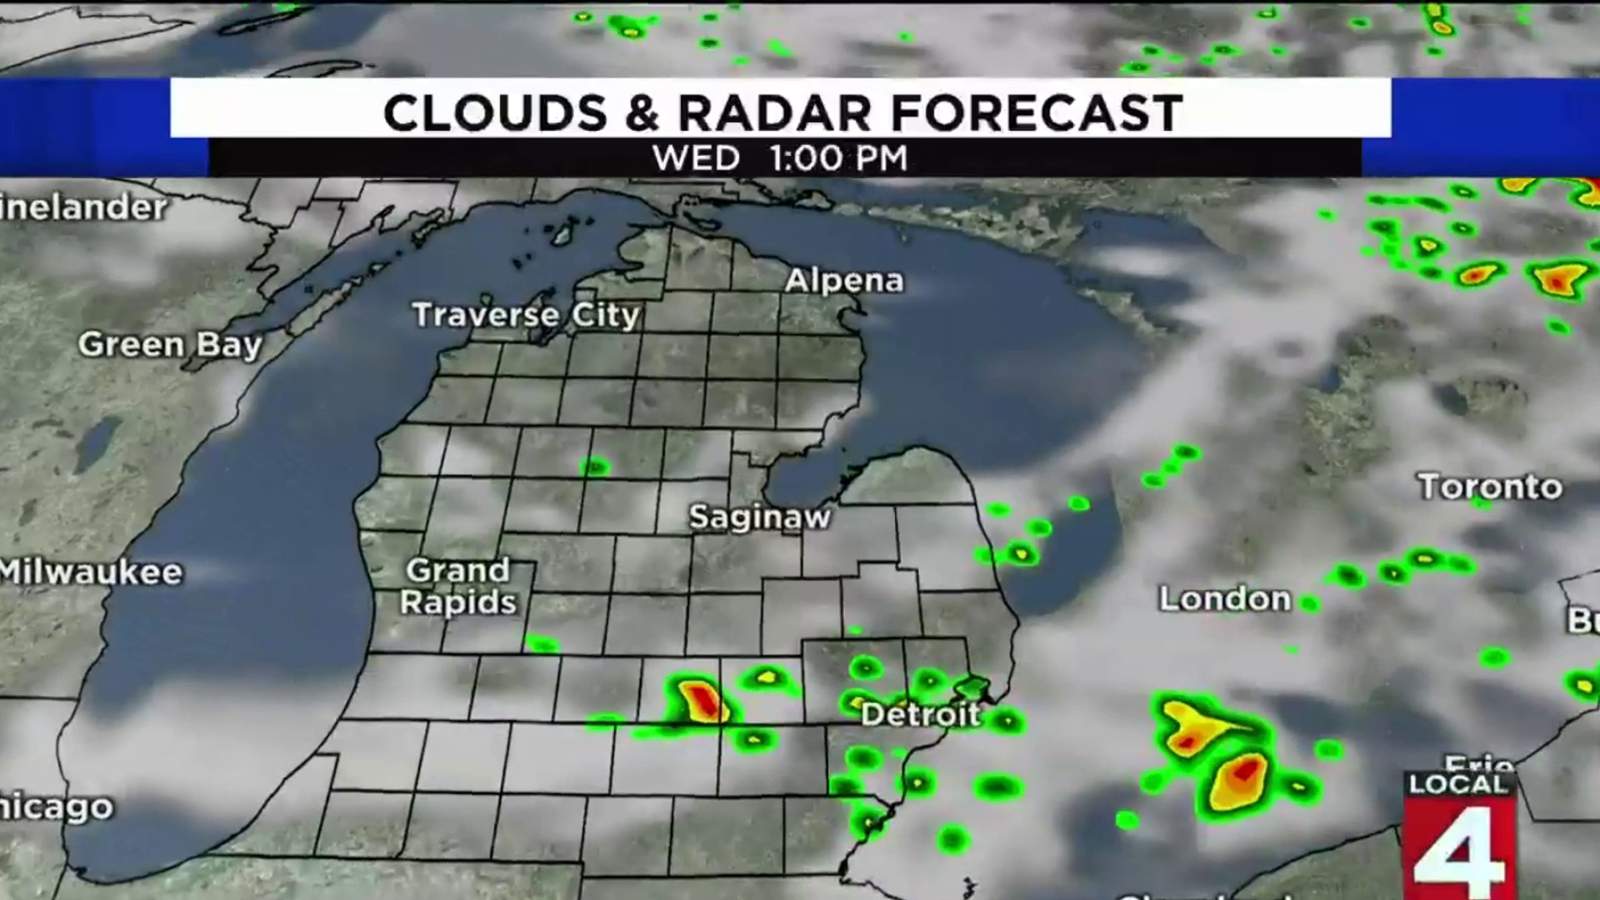 Metro Detroit weather: Storms for some, but not all